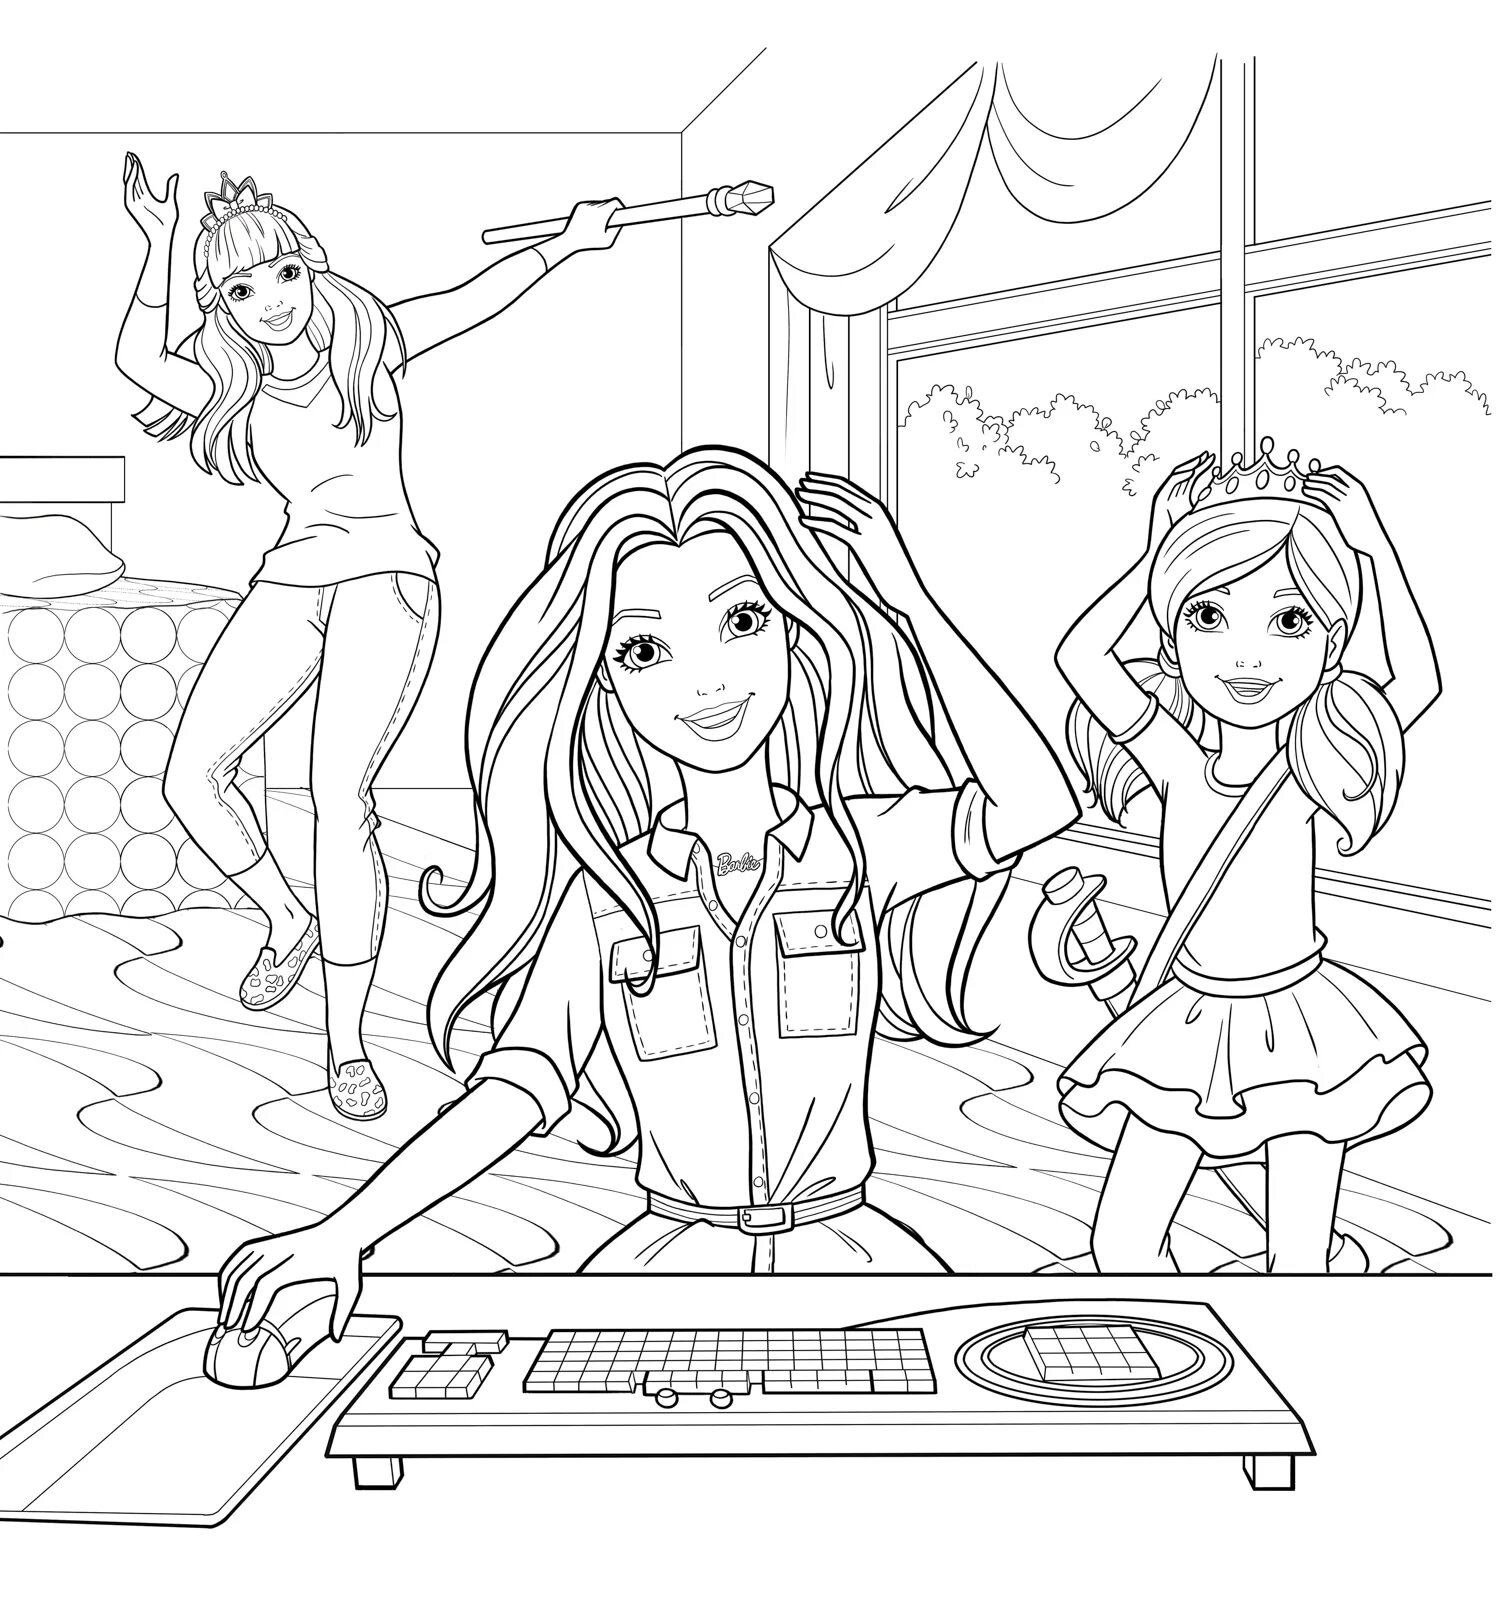 Chelsea Barbie coloring page